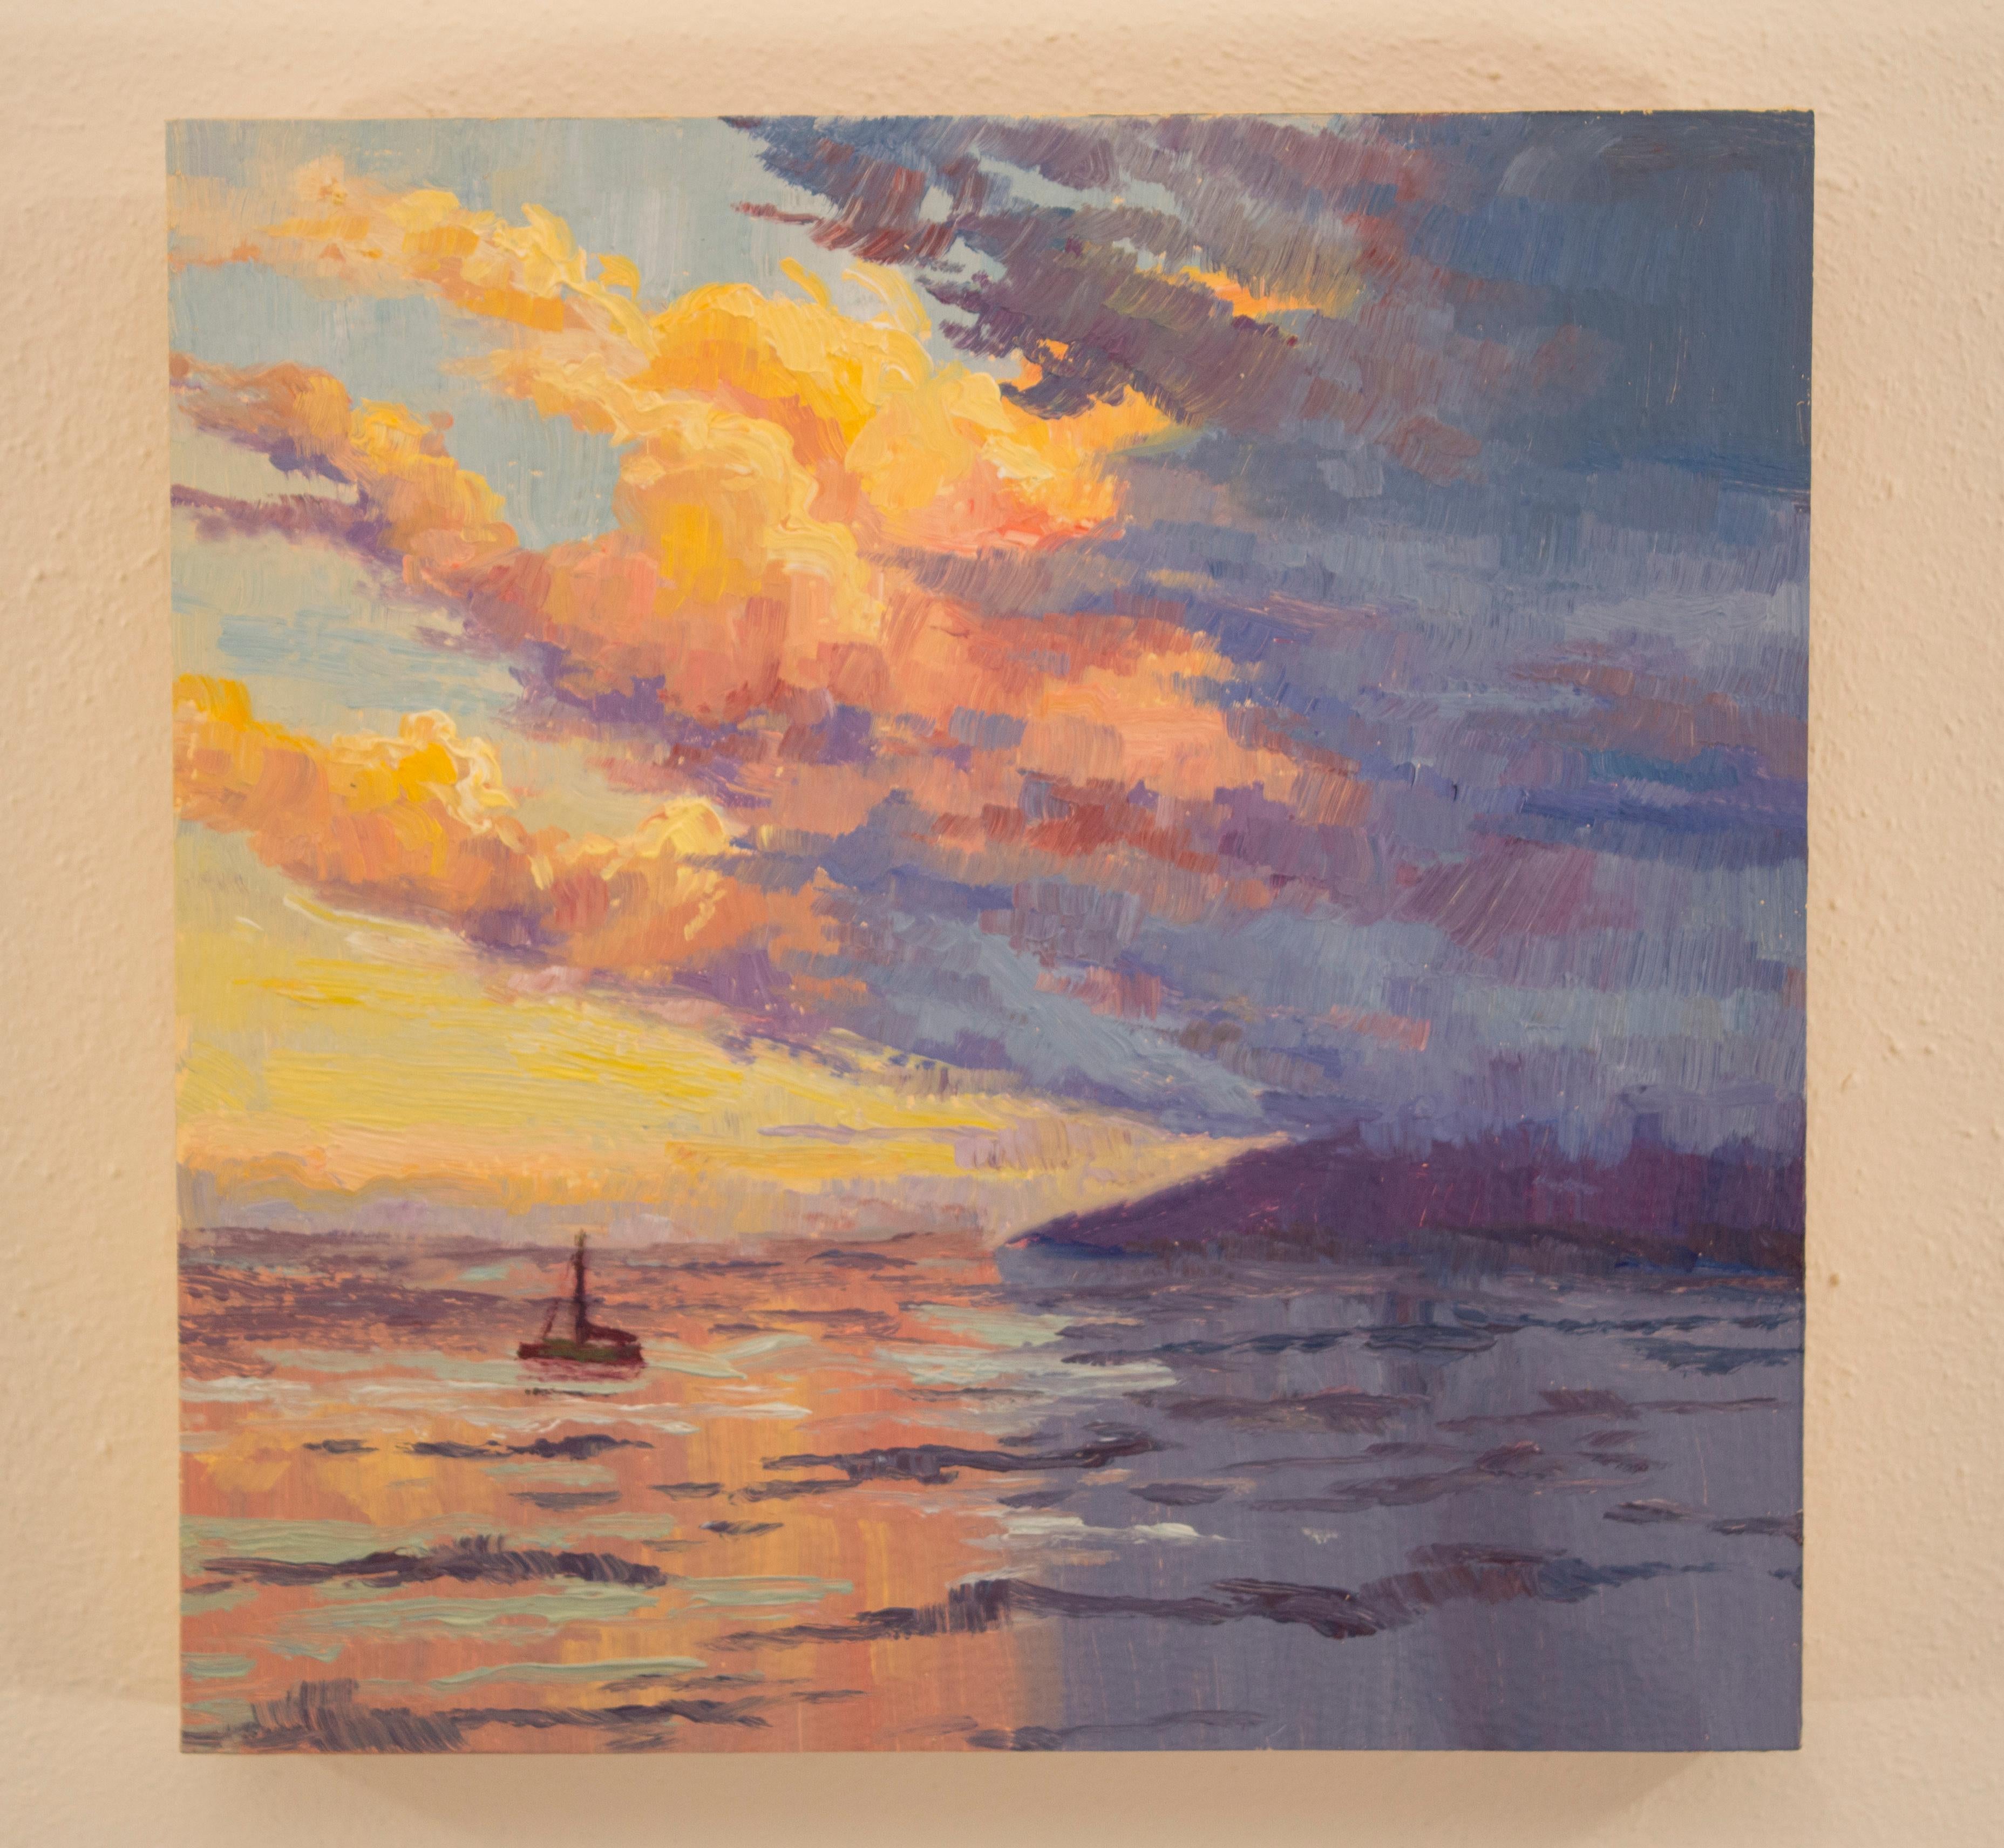 <p>Artist Comments<br />Maui has legendary sunsets.  Time to take a sail out around the islands!</p><br /><p>About the Artist<br />Karen E. Lewis grew up on the water, swimming, kayaking and later guiding rafting tours down the Deschutes River. She